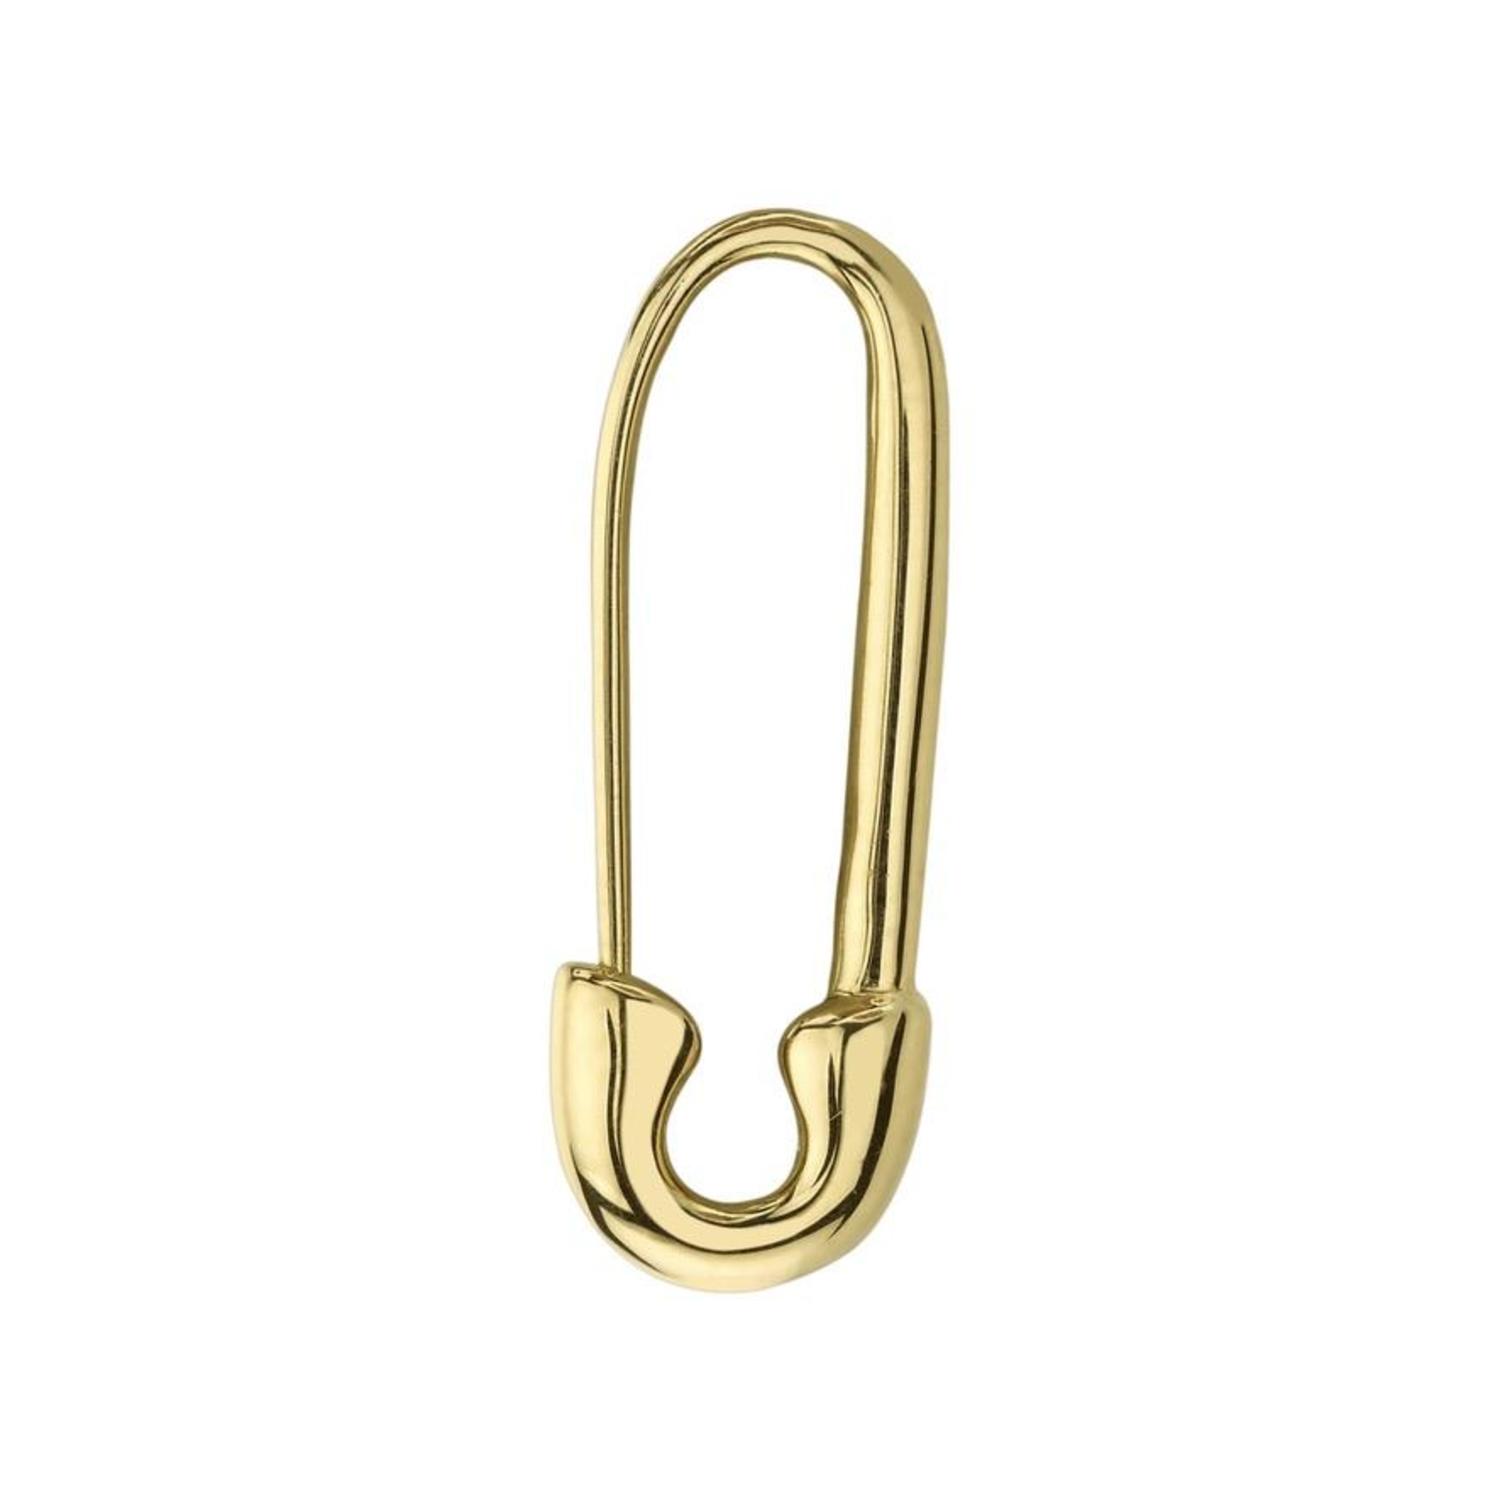 Oversized Safety Pin Earring Gold / Single